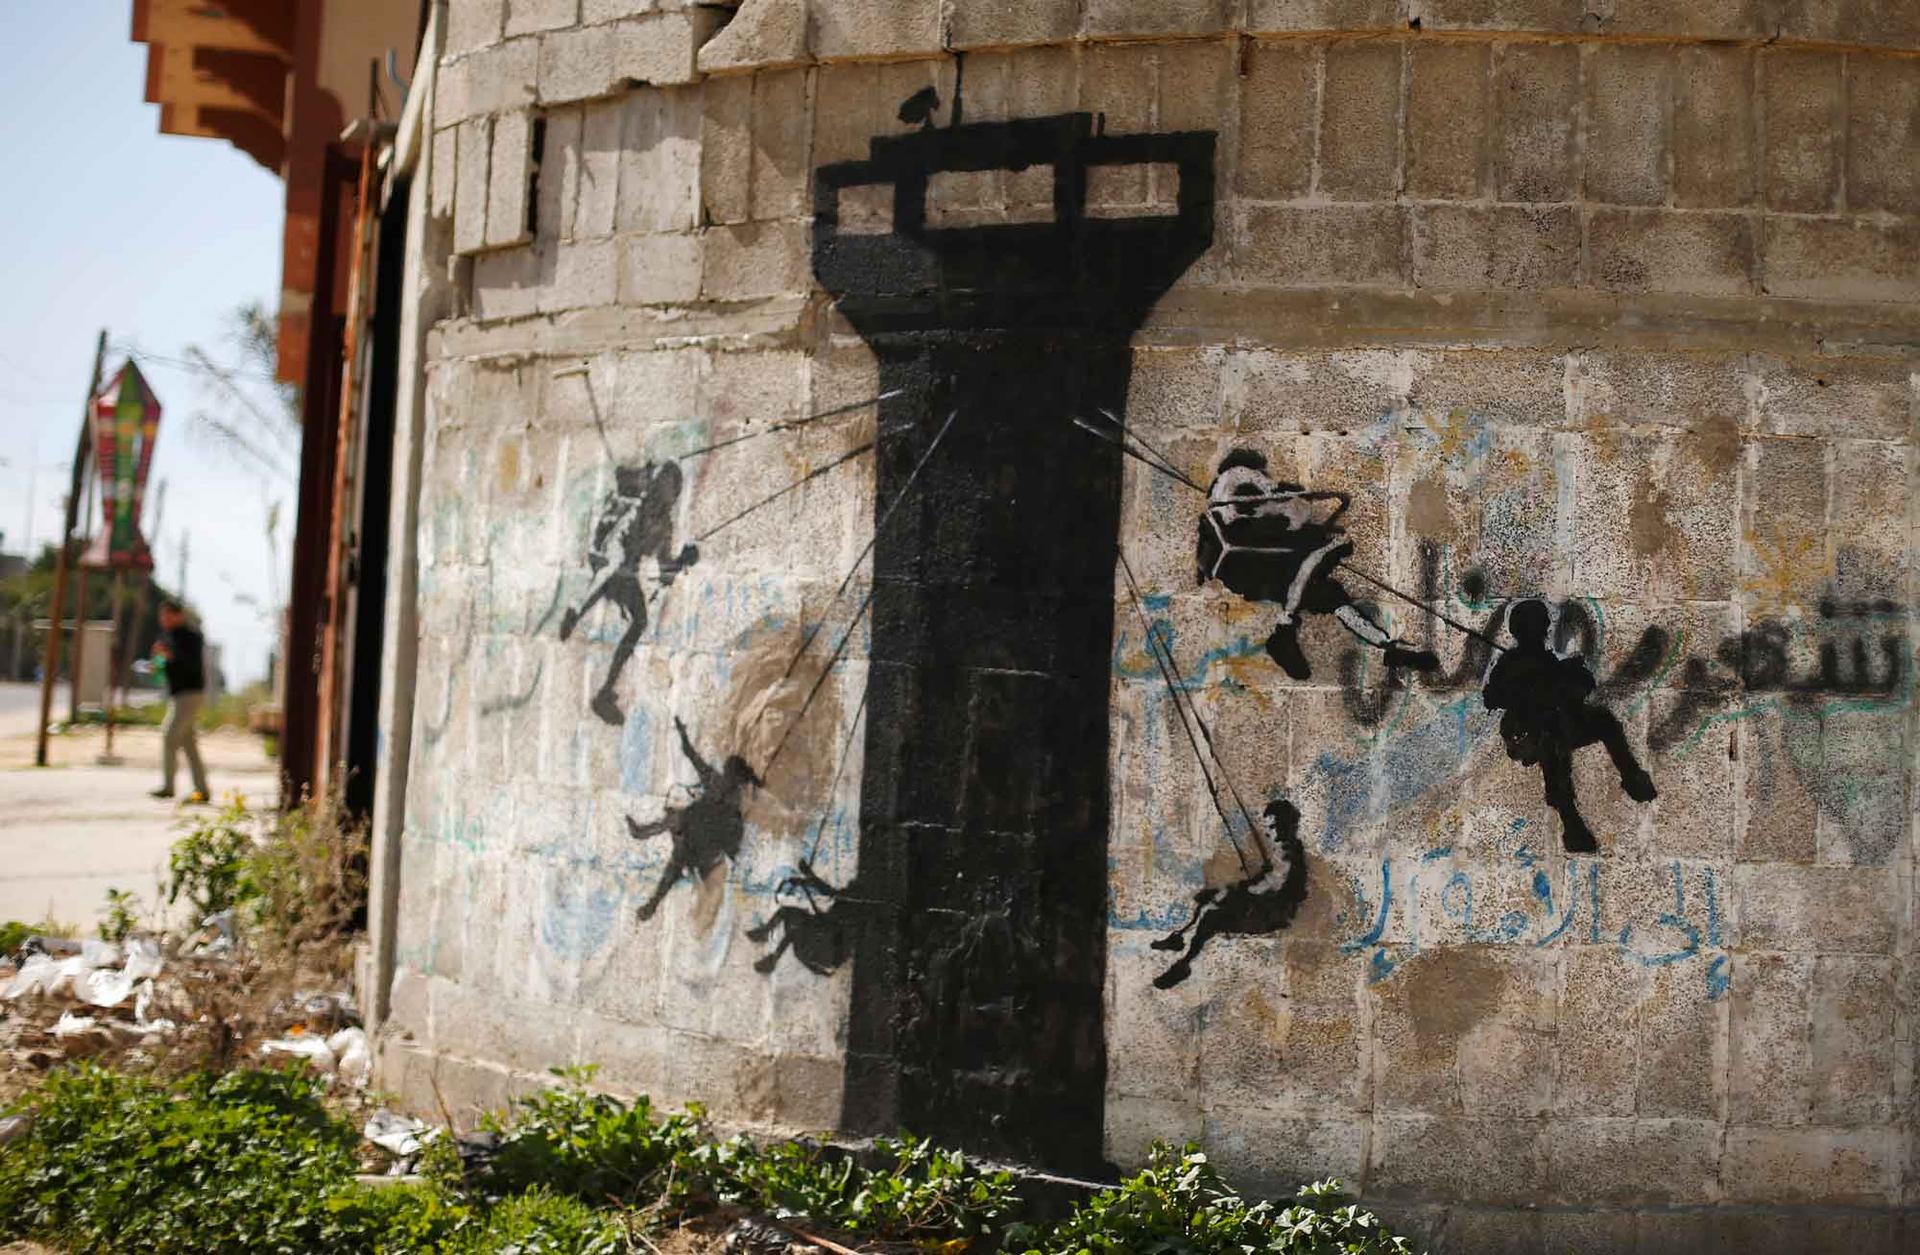 A mural, thought to be painted by British street artist Banksy, is seen on a wall in Biet Hanoun town in the northern Gaza Strip.